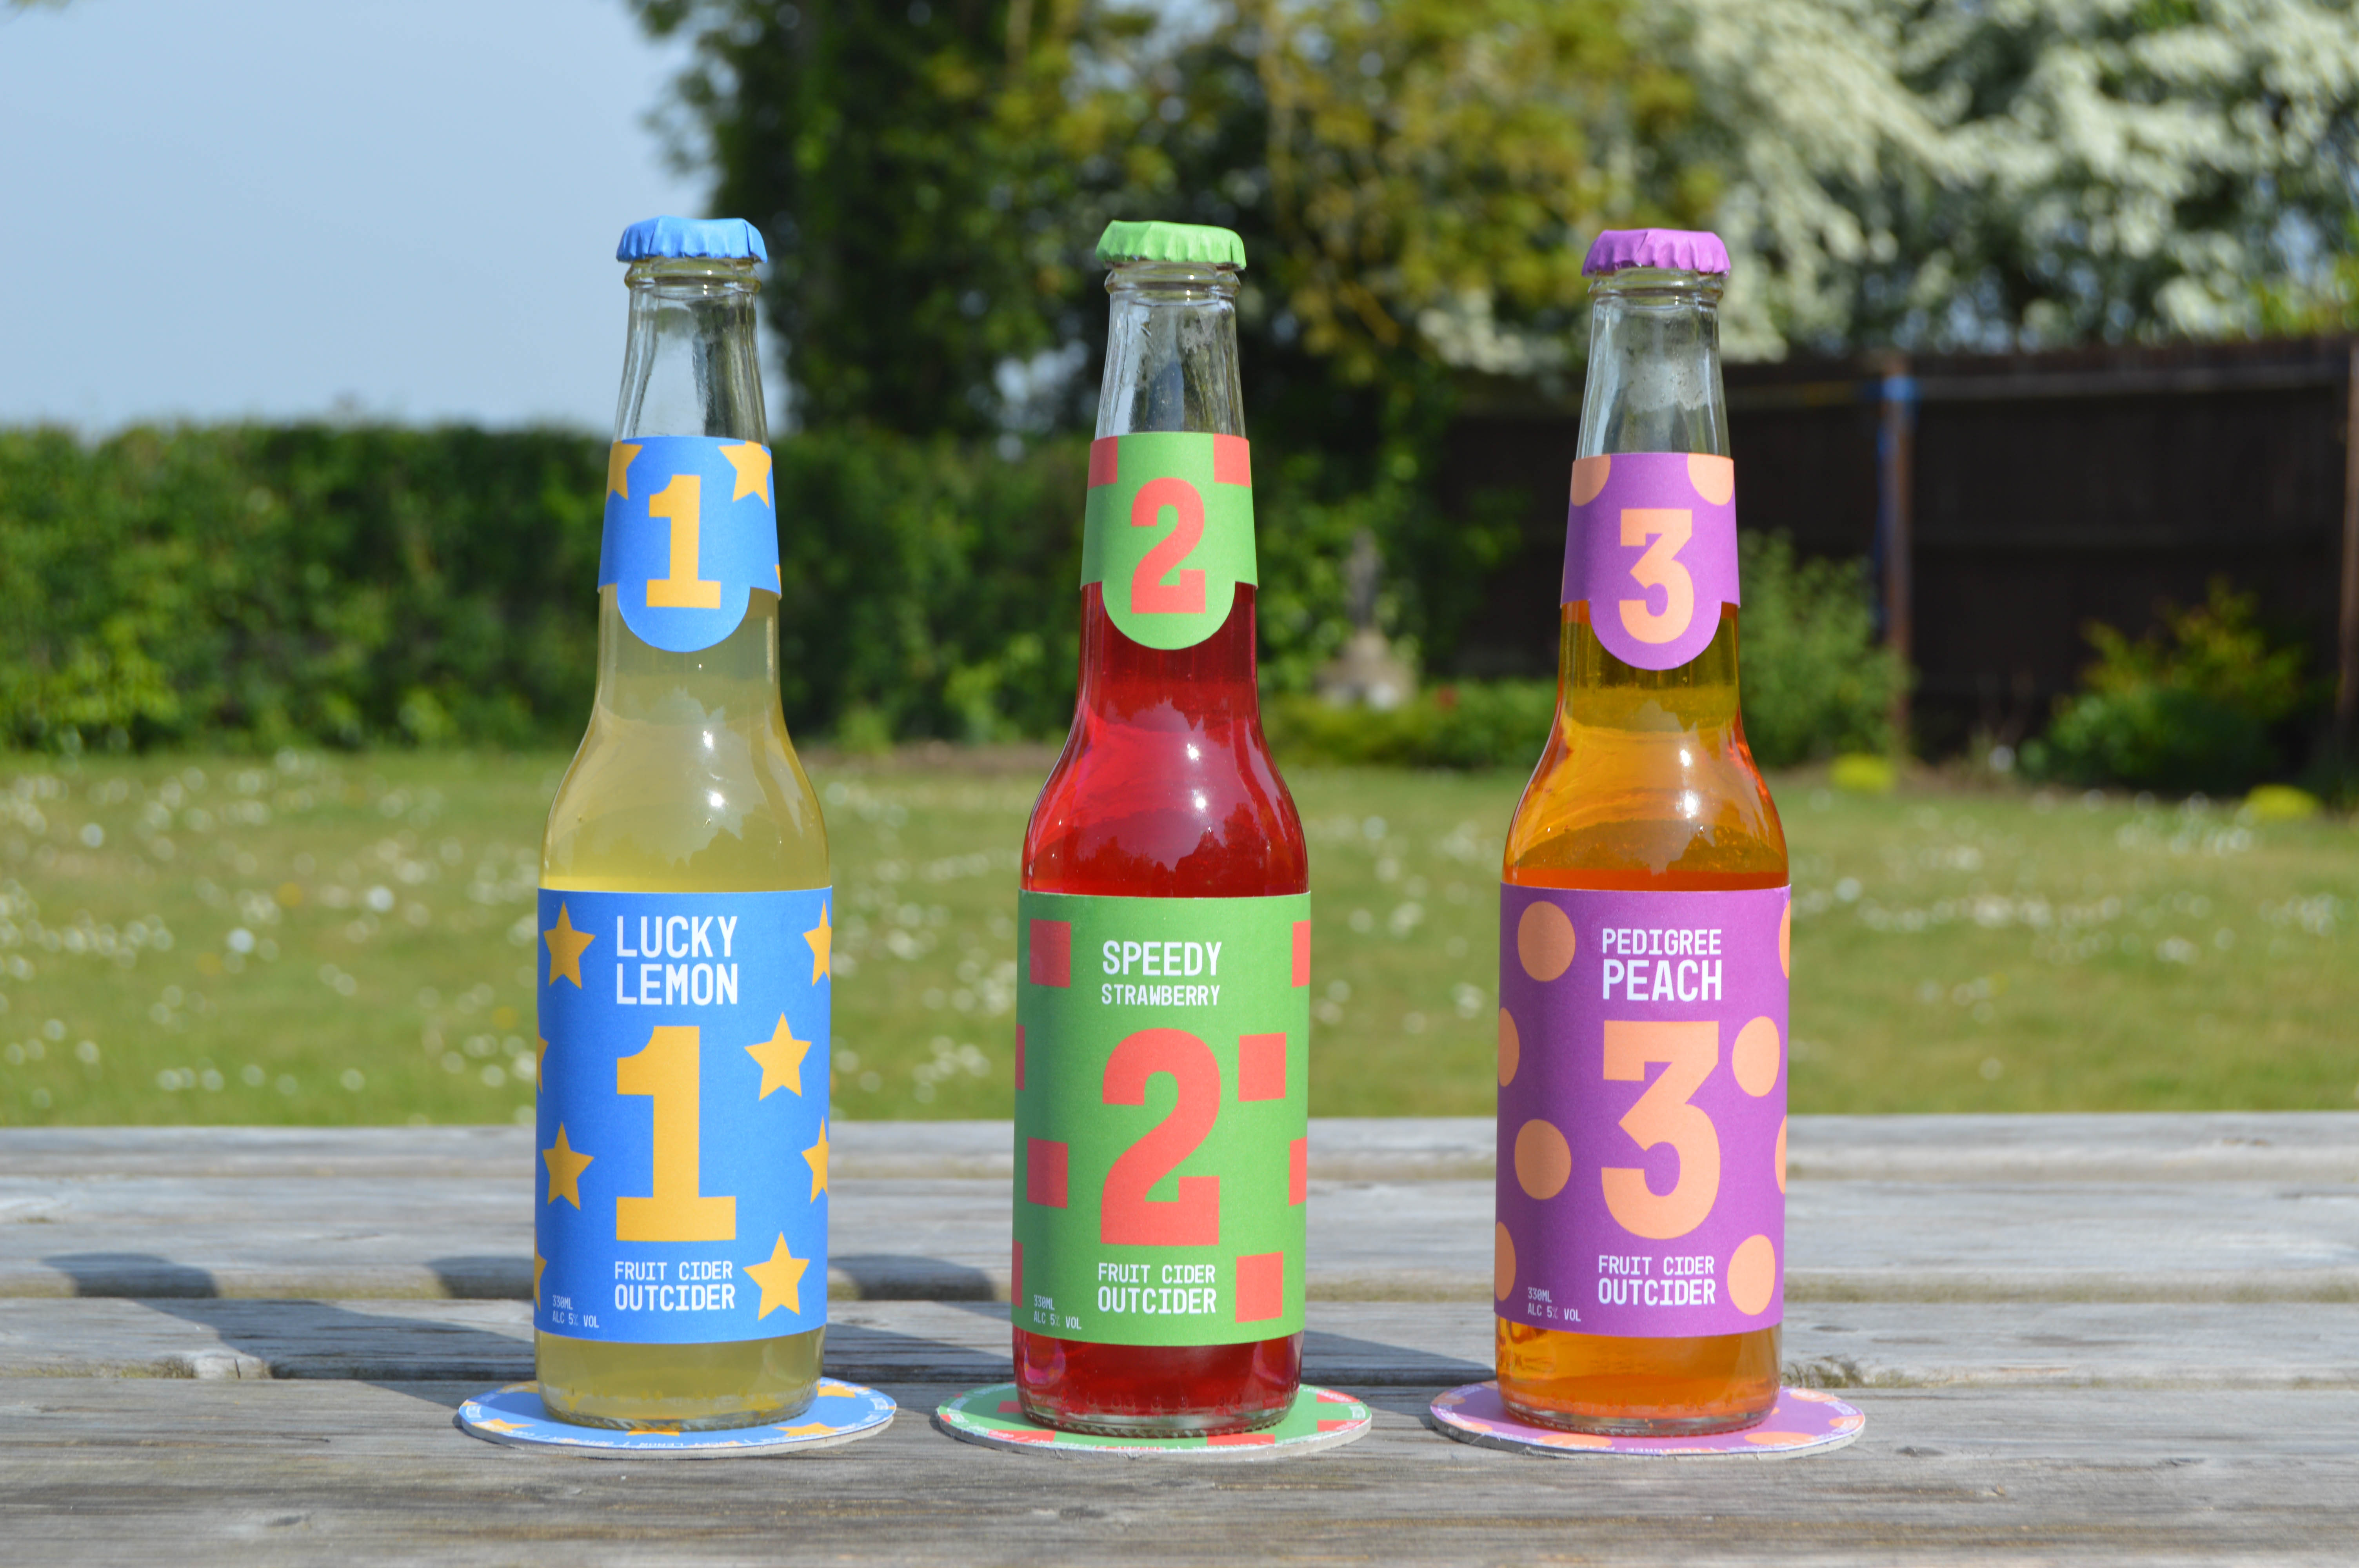 Student Creates Alcohol Brand Based on Horse Racing